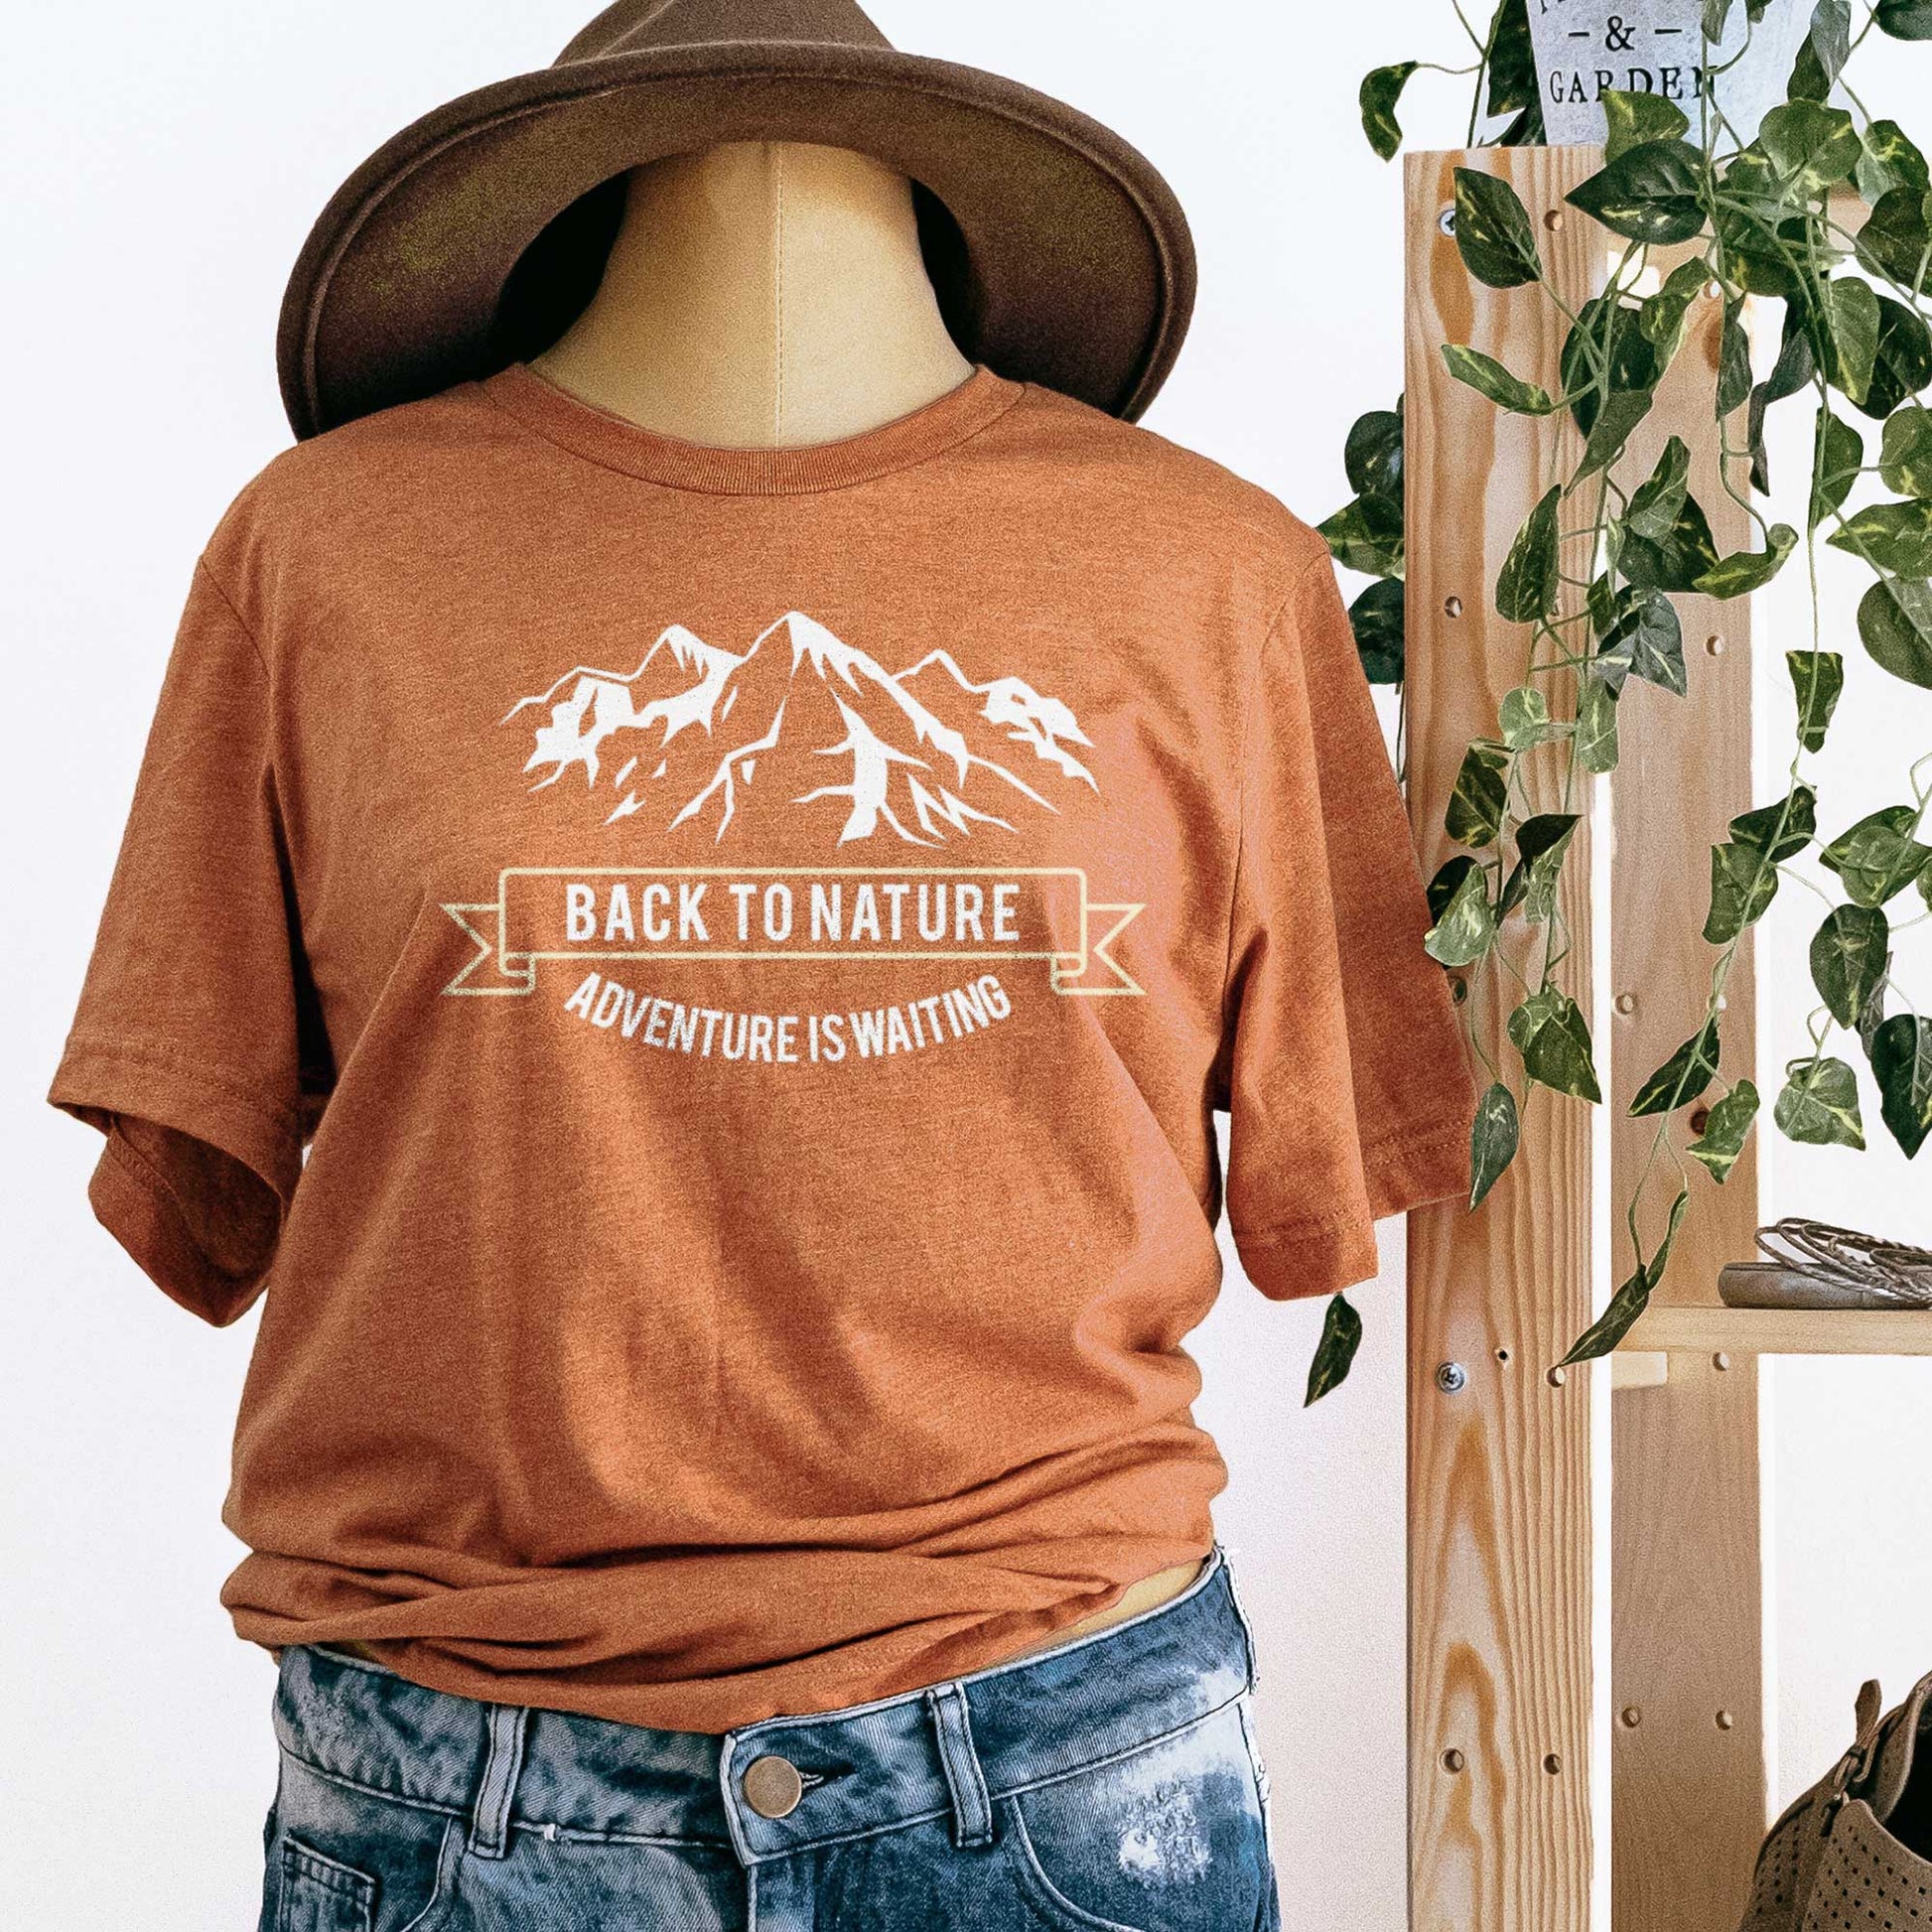 A mannequin wearing heather autumn Bella Canvas t-shirt that says back to nature with mountains.